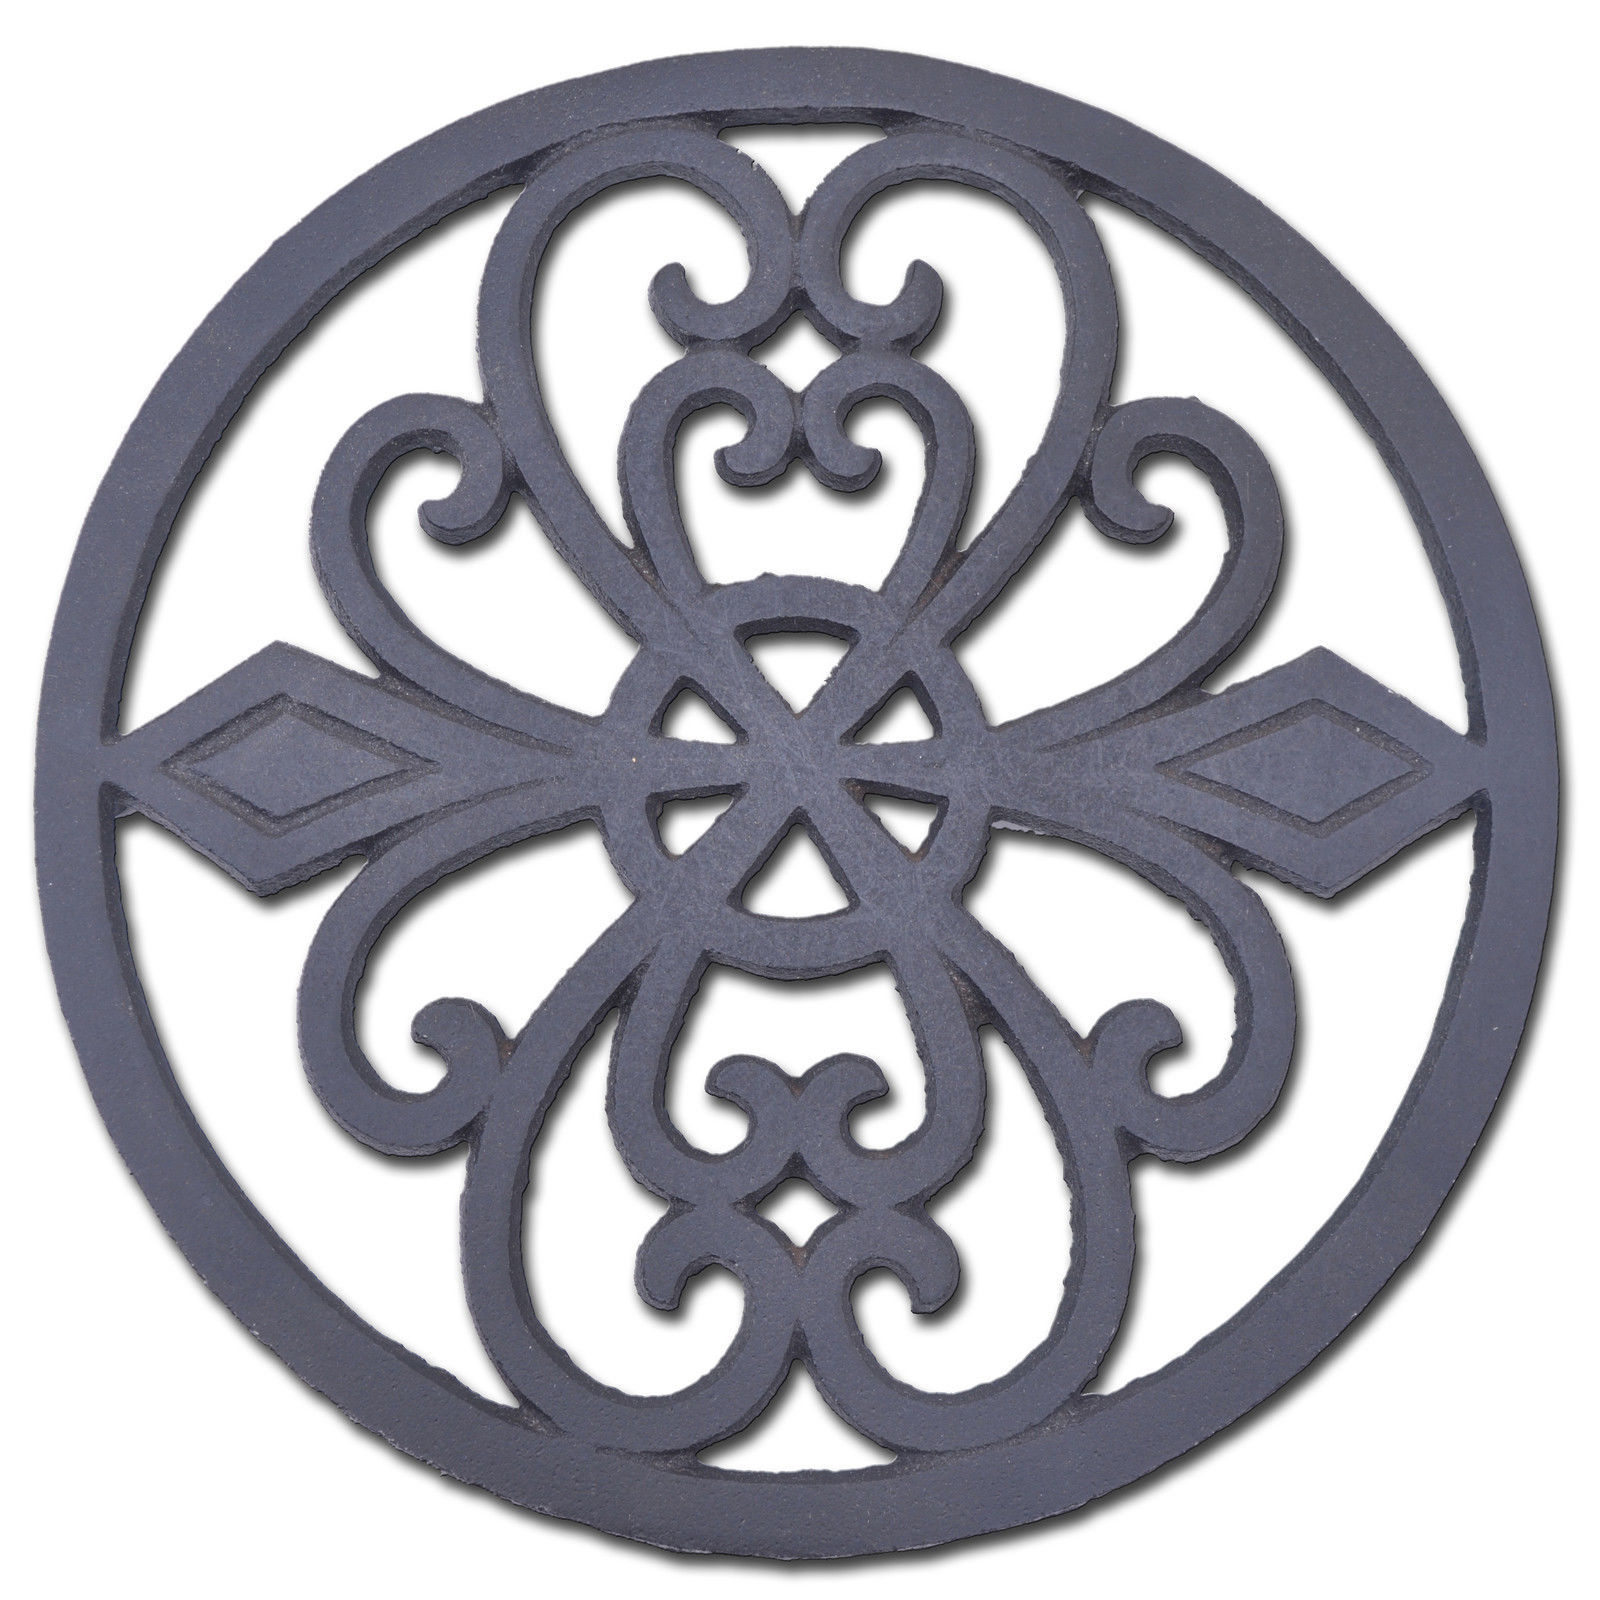 Primary image for Decorative Round Cast Iron Trivet Ornate Heart Design Kitchen Hot Pad 8" Wide N